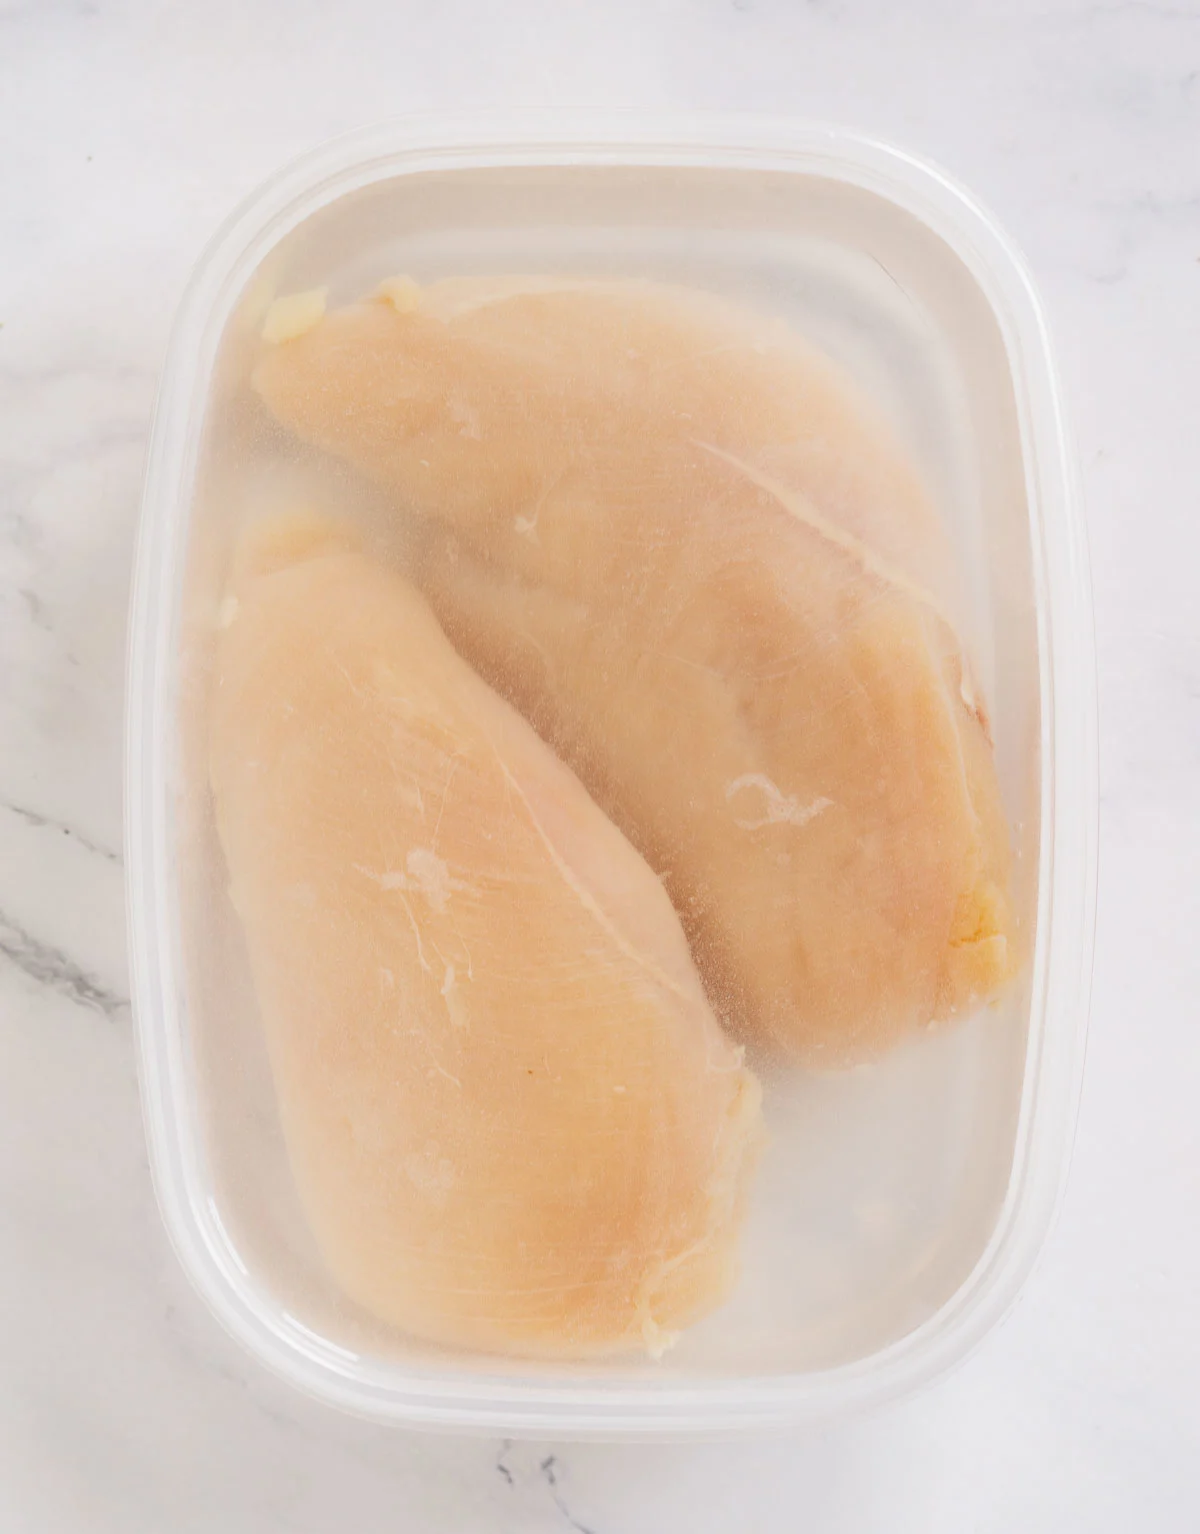 Brining two chicken breasts in a container